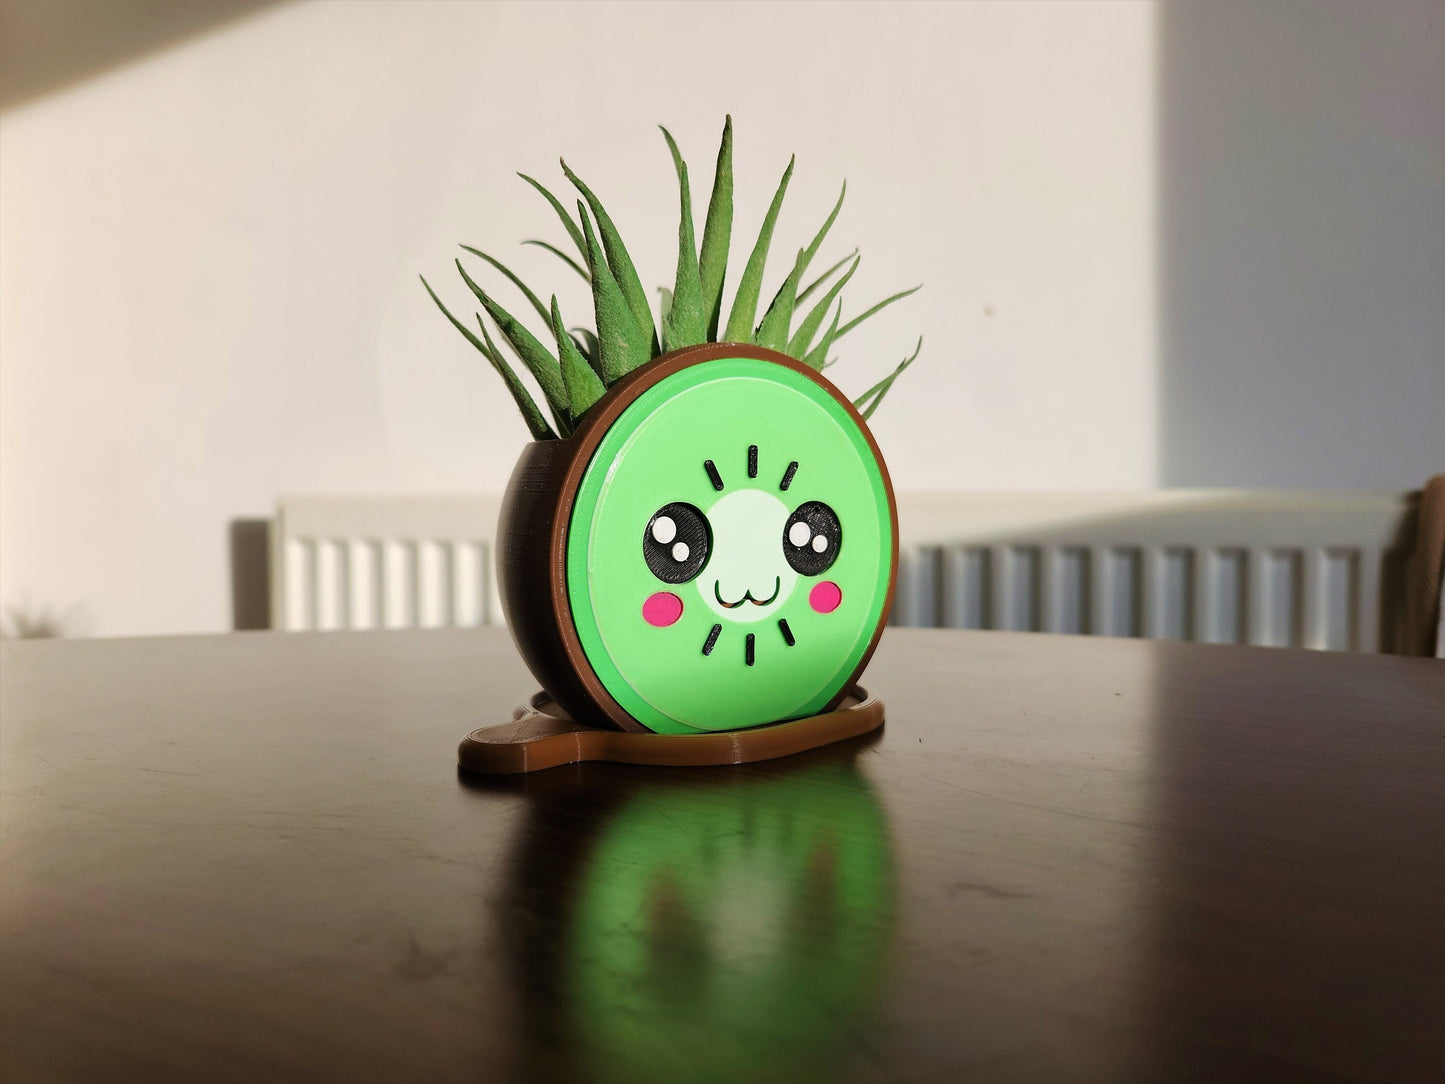 Kawaii Kiwi Flower Pot - Unique and Quirky Plant Home